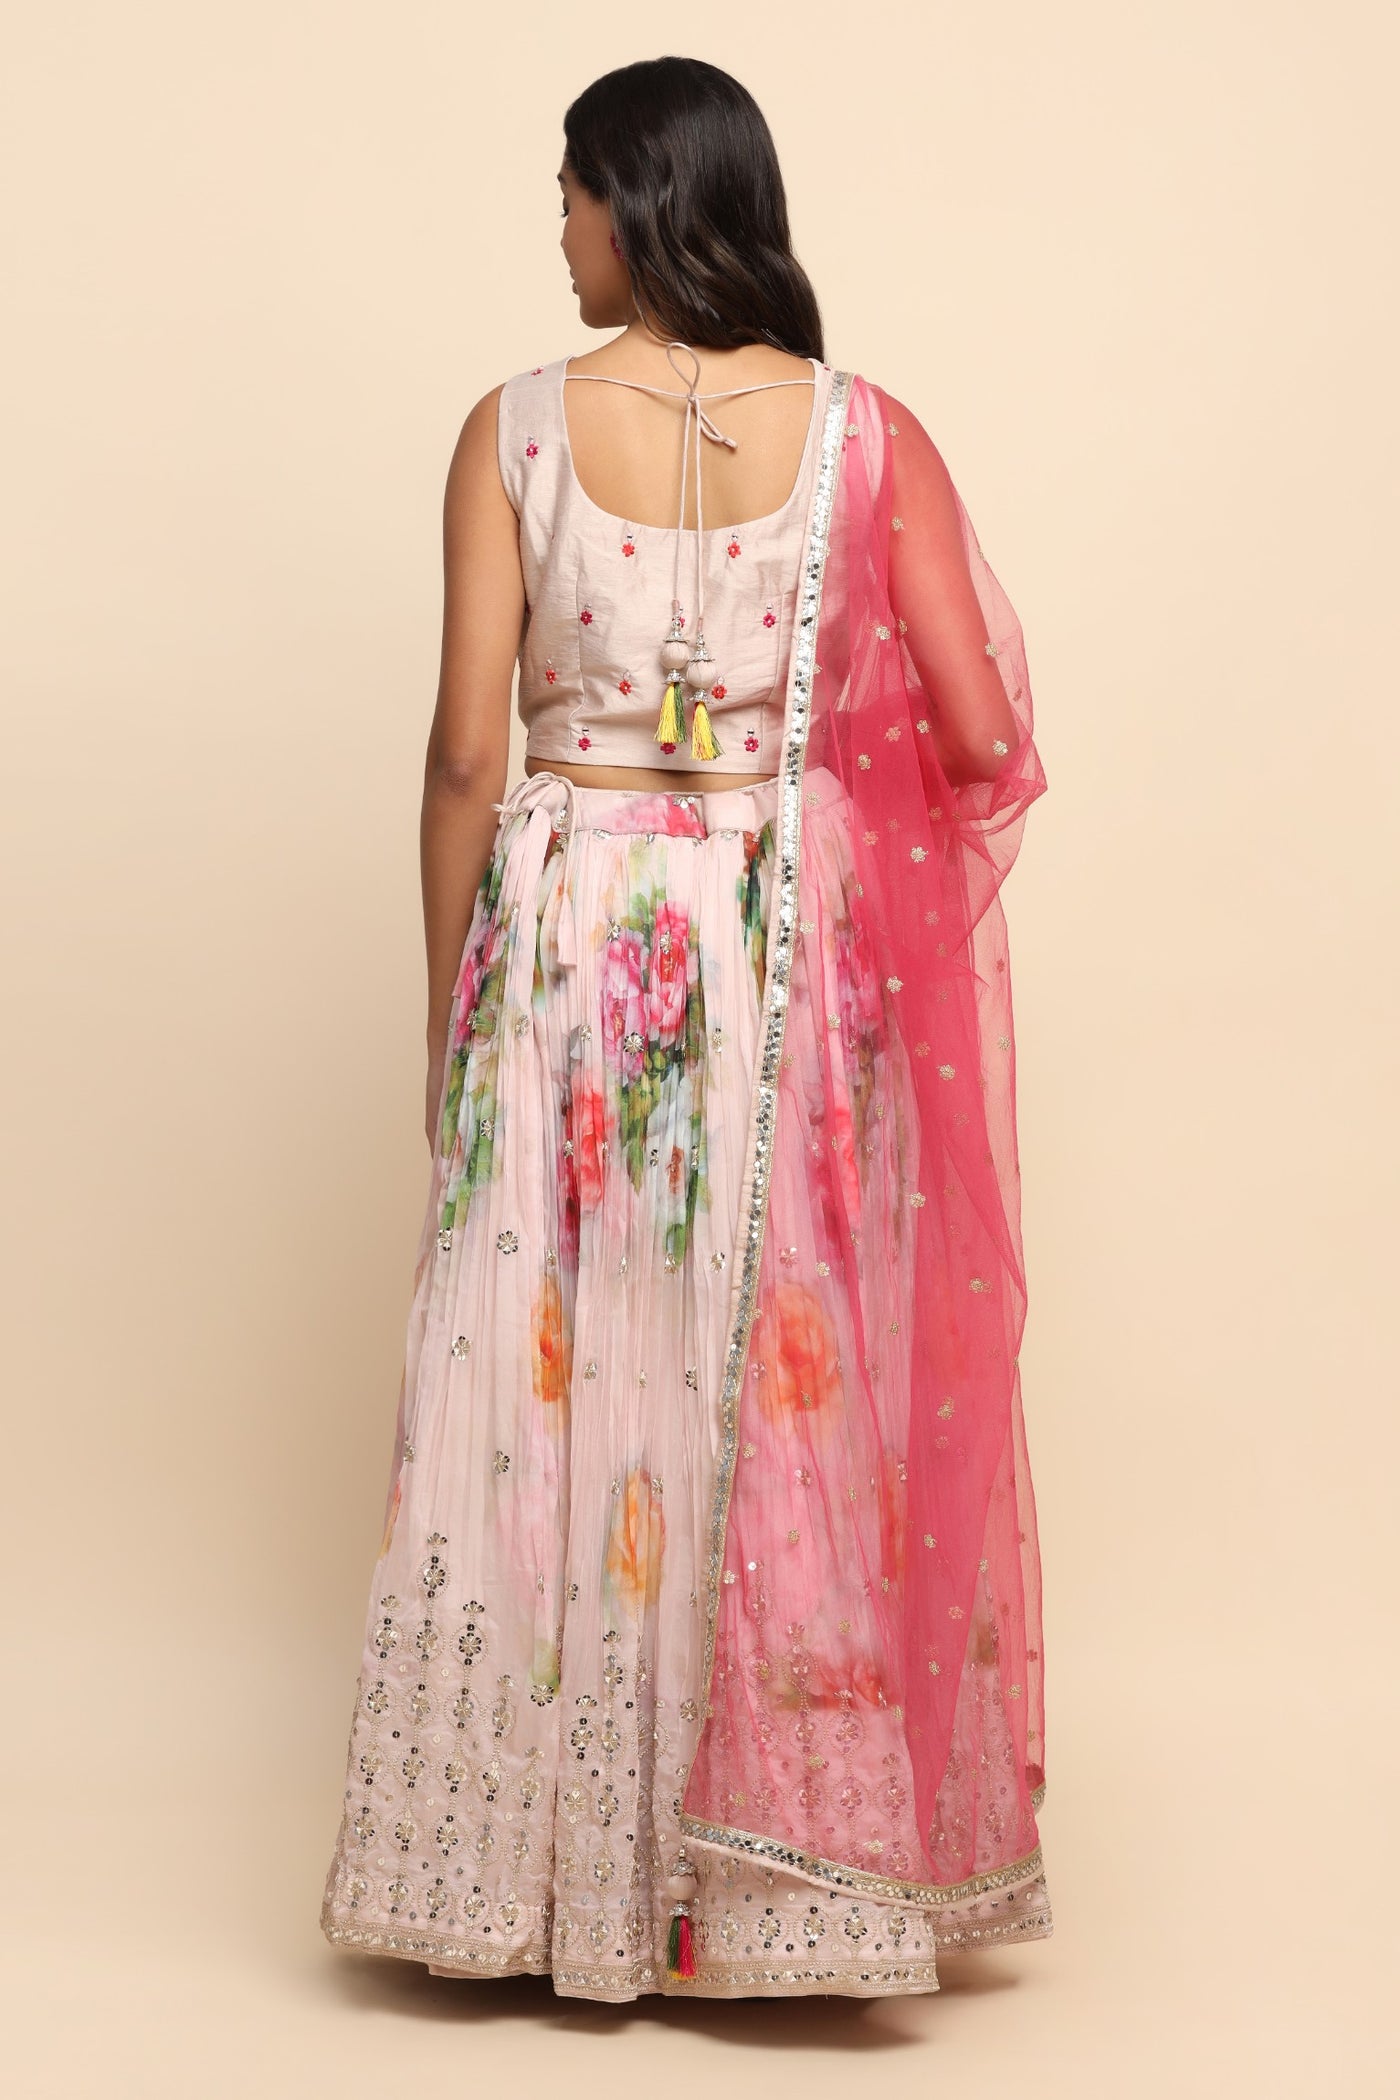 Girl Wearing A Light Pink Color Floral Printed and Embroidered Lehenga Set